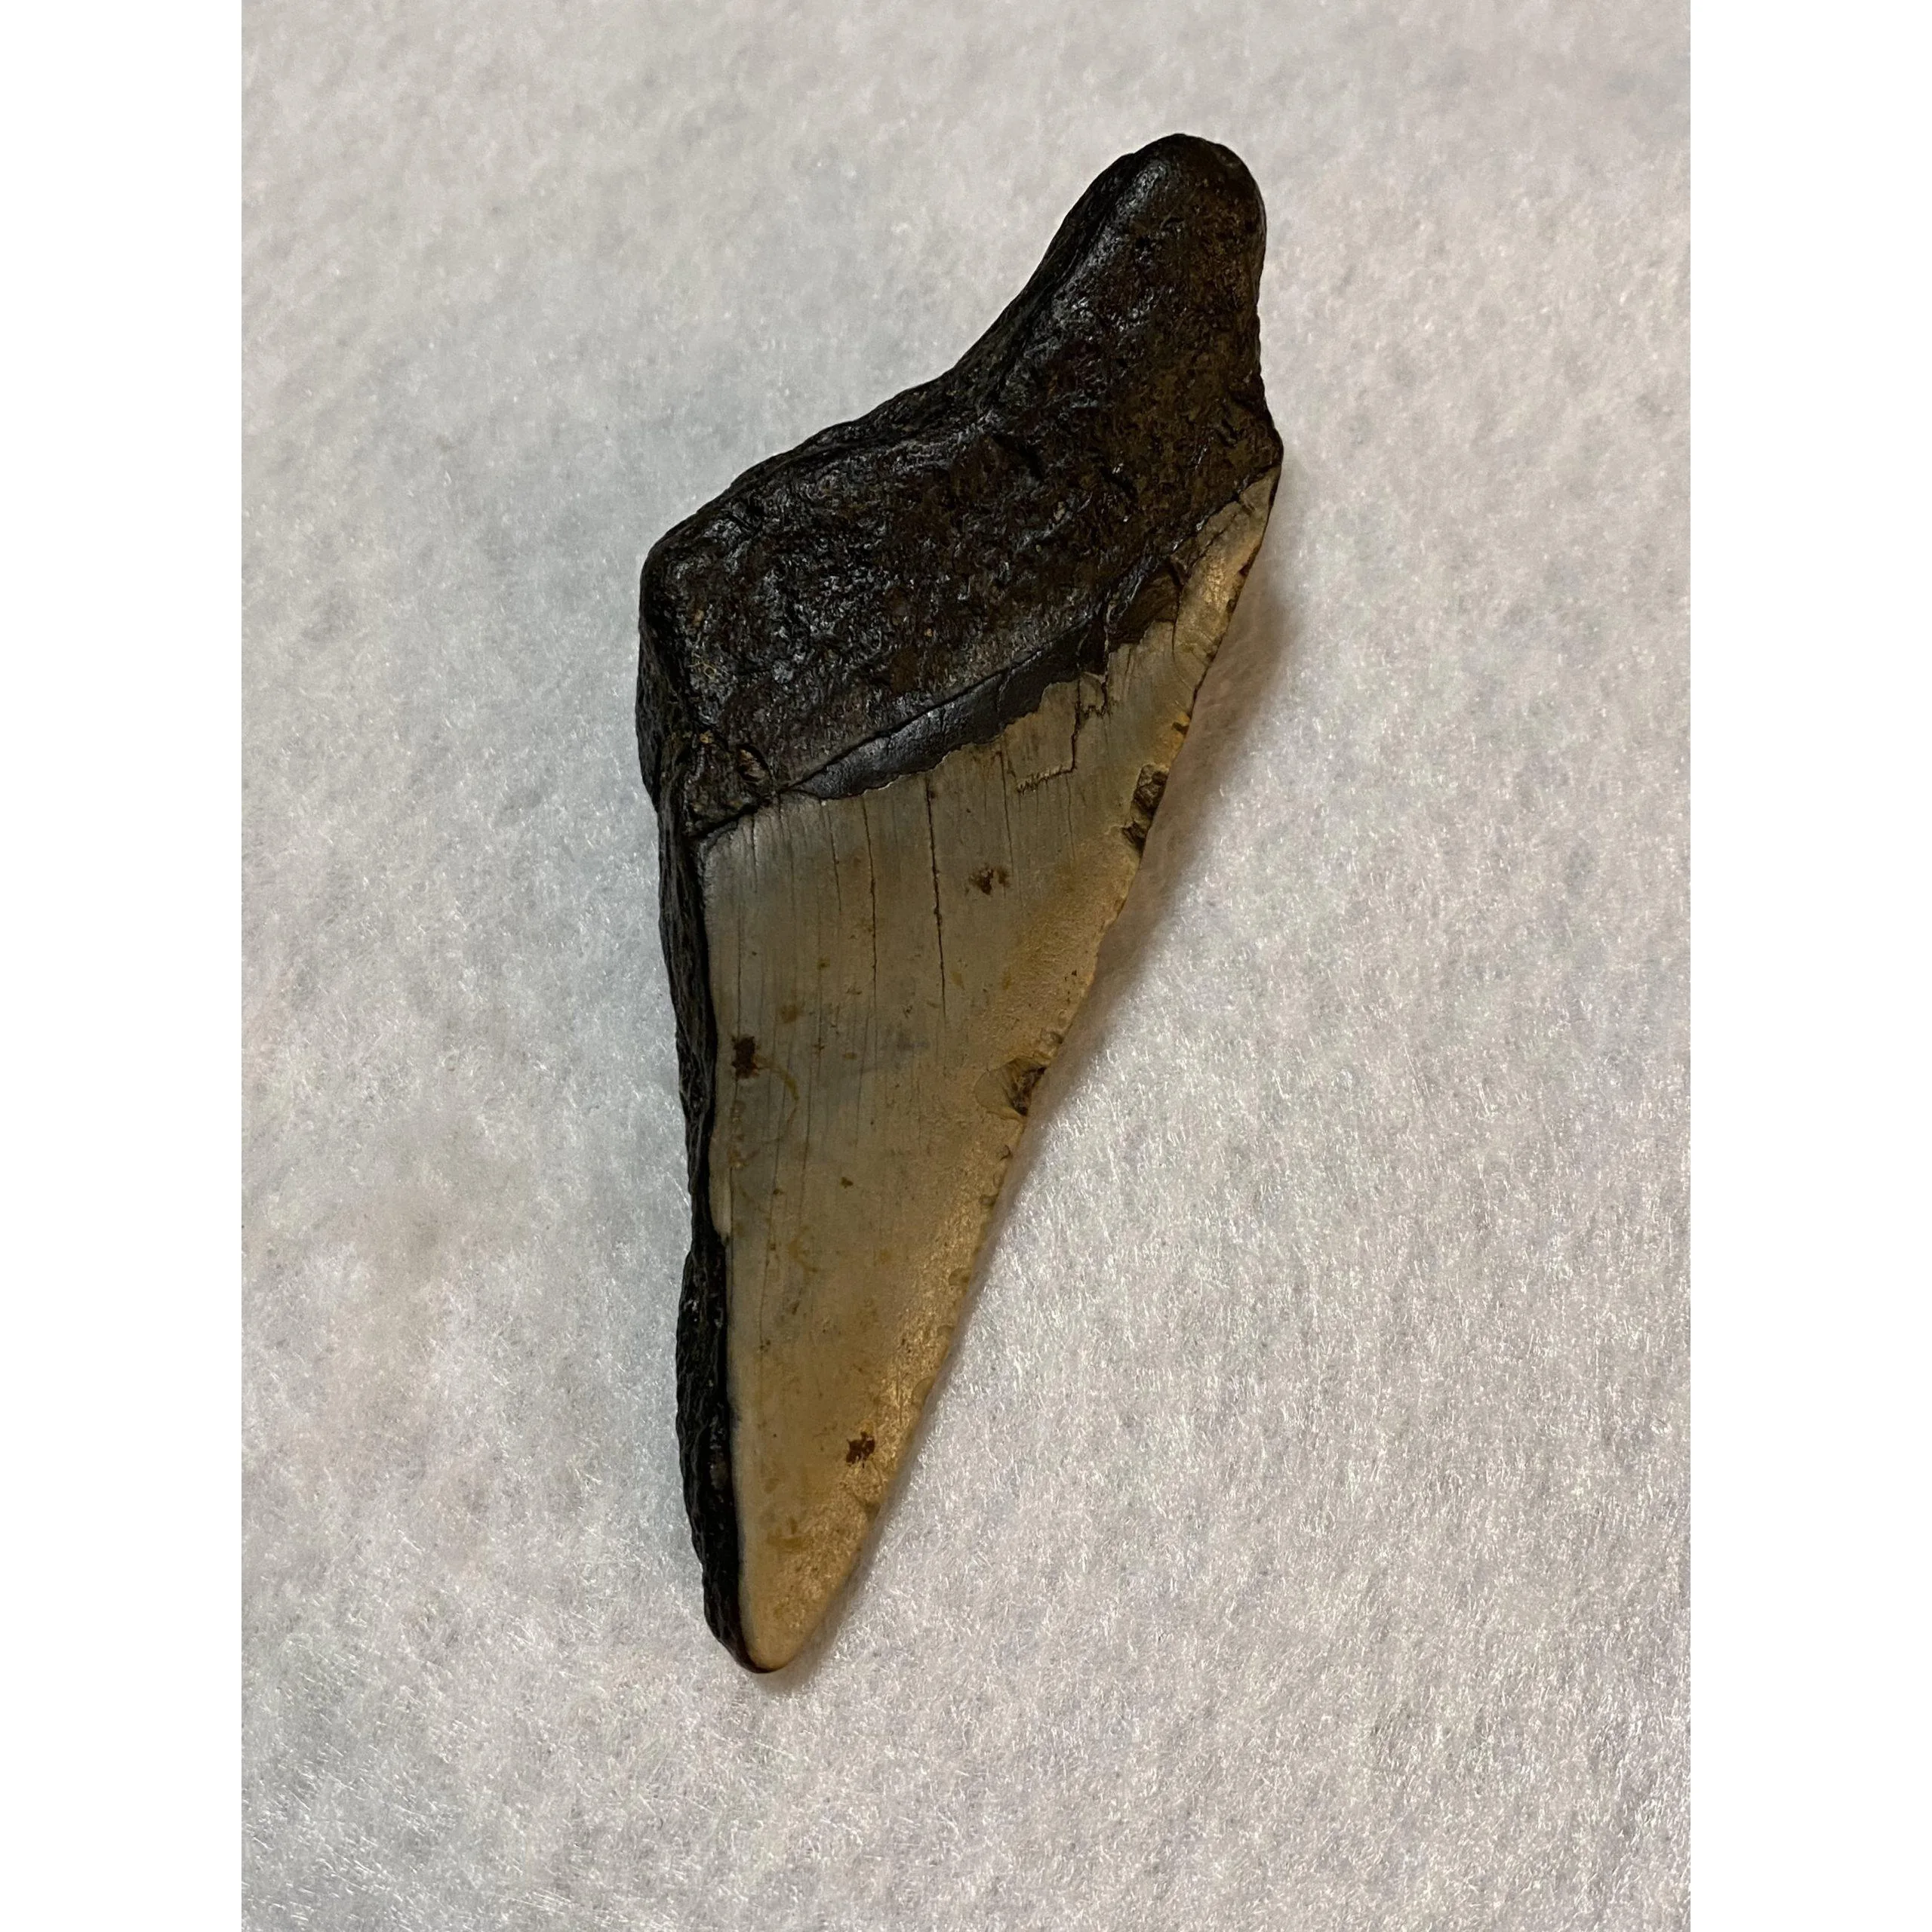 Megalodon Partial Tooth, South Carolina, 4.85 inch Prehistoric Online